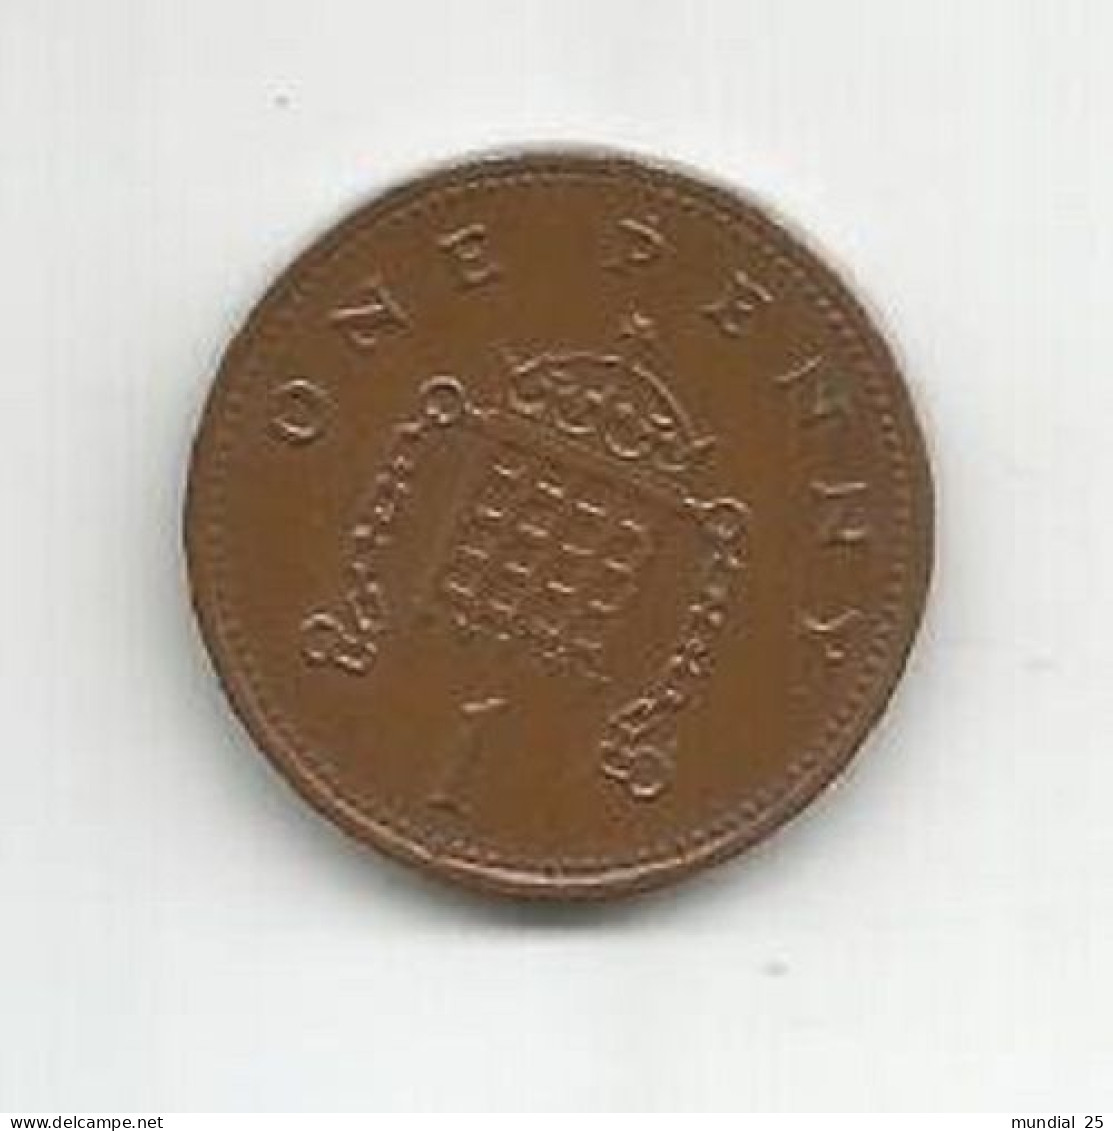 GREAT BRITAIN 1 PENNY 1994 - 1 Penny & 1 New Penny